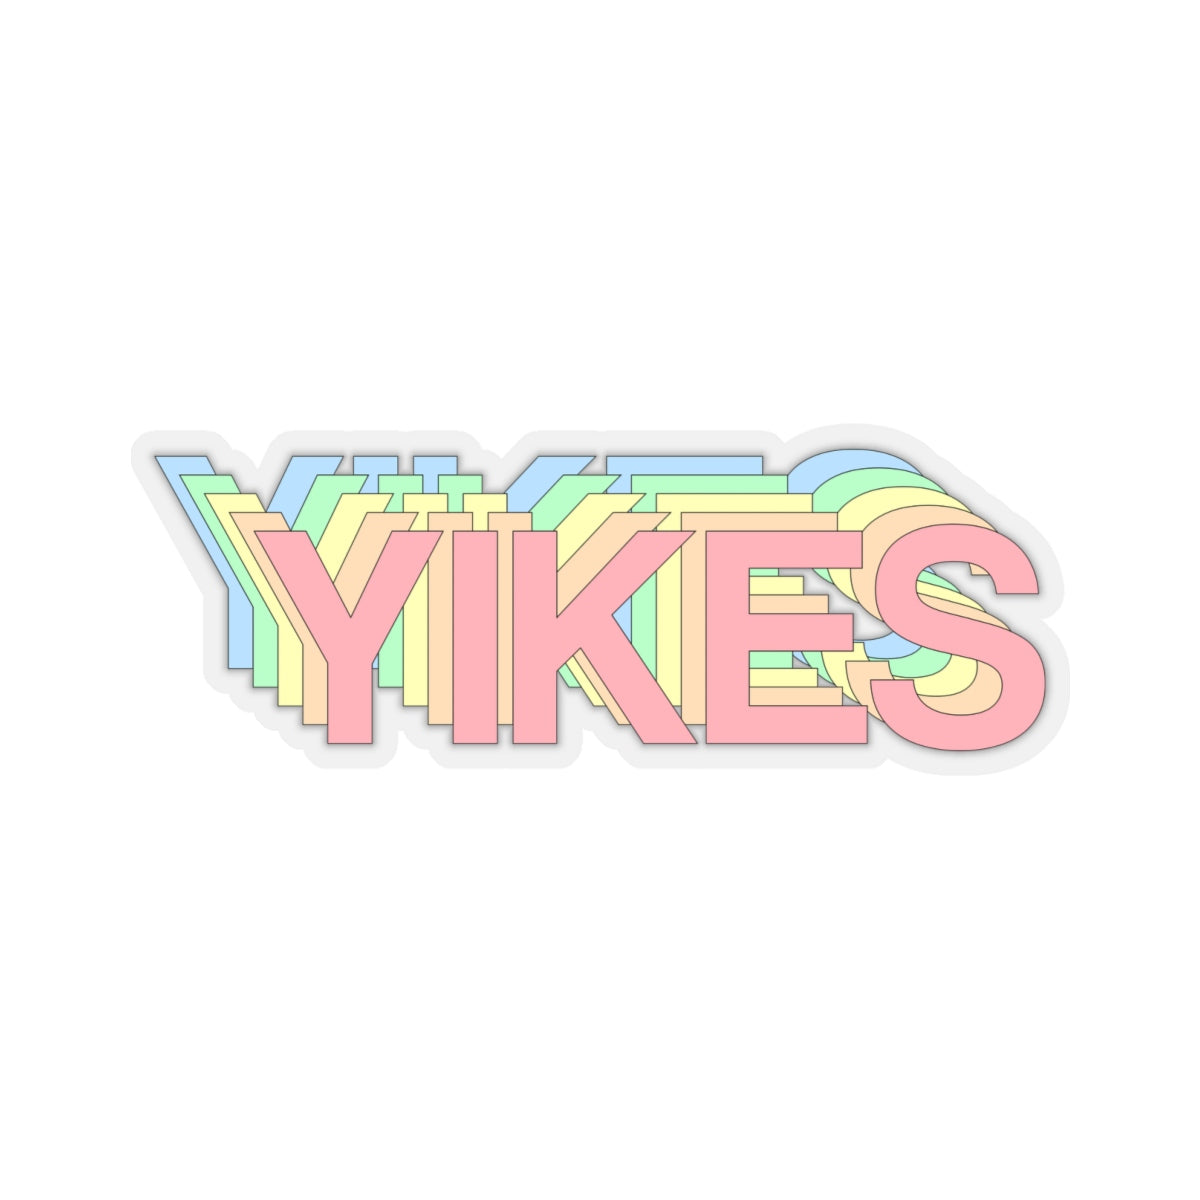 Yikes Stickers, Pastel Rainbow Laptop Vinyl Cute Waterproof for Waterbottle Tumbler Car Bumper Aesthetic Label Wall Phone Decal - Starcove Design